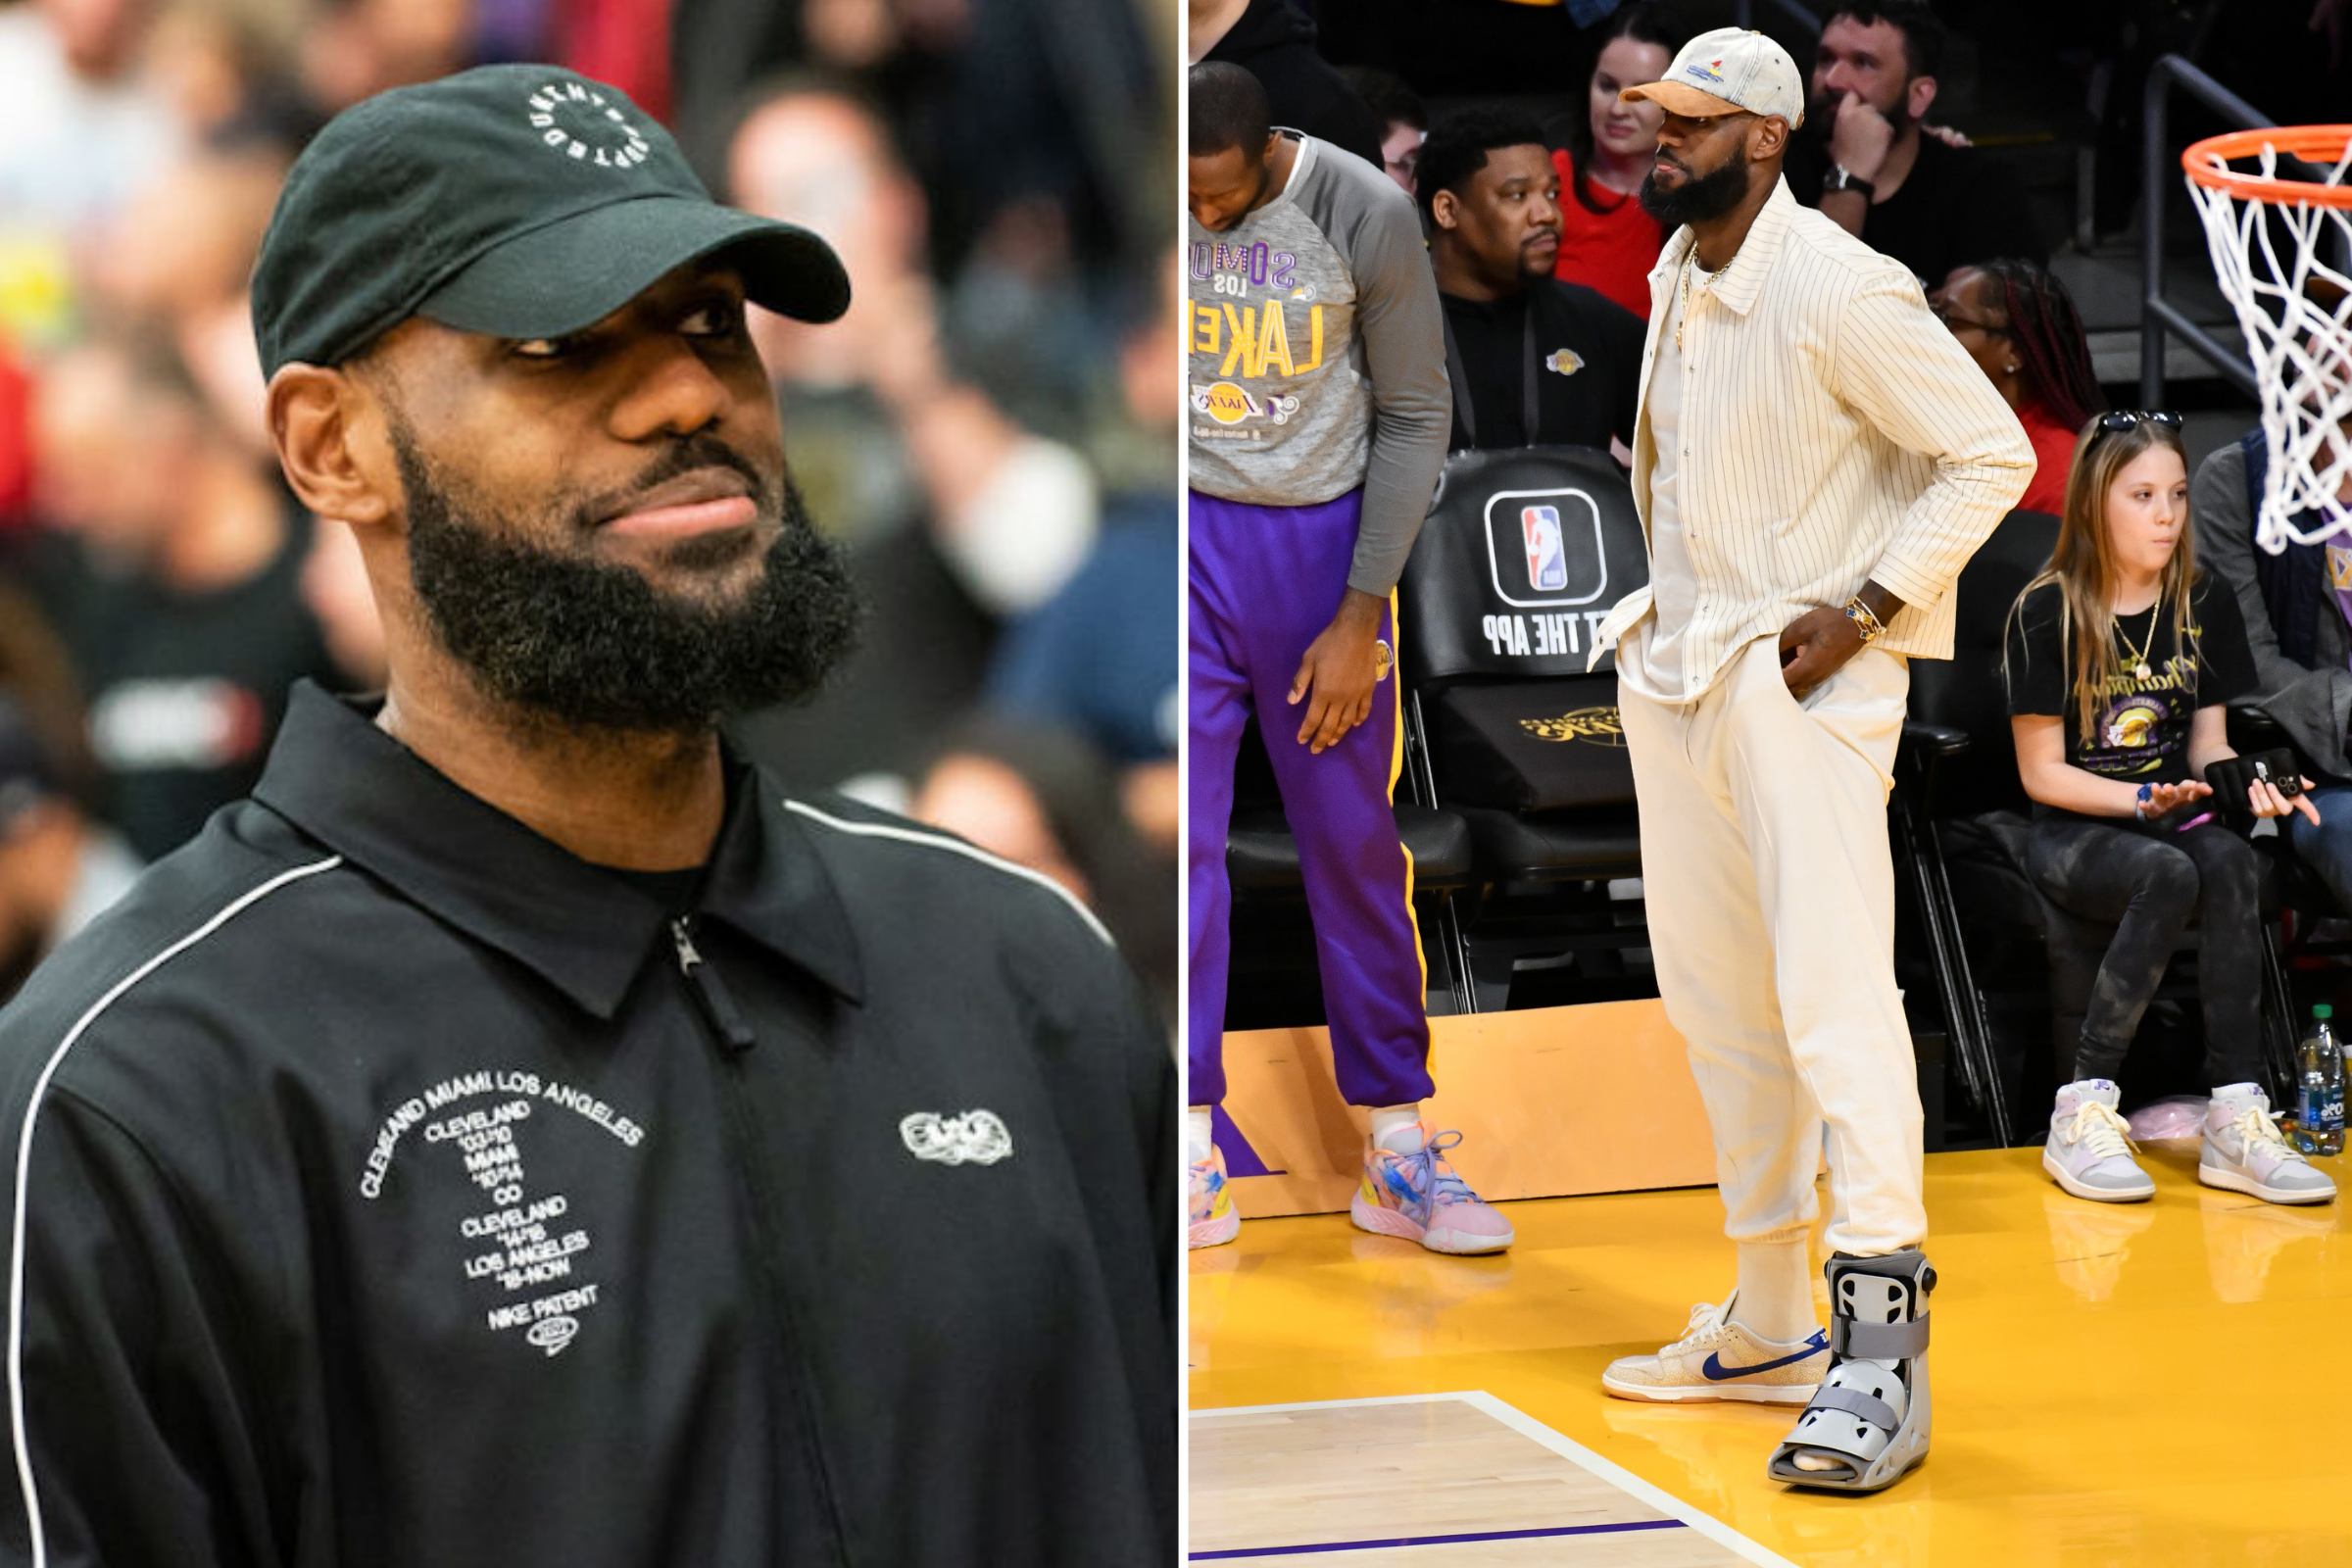 LeBron James Lakers apparel guide: How to rep the king in style